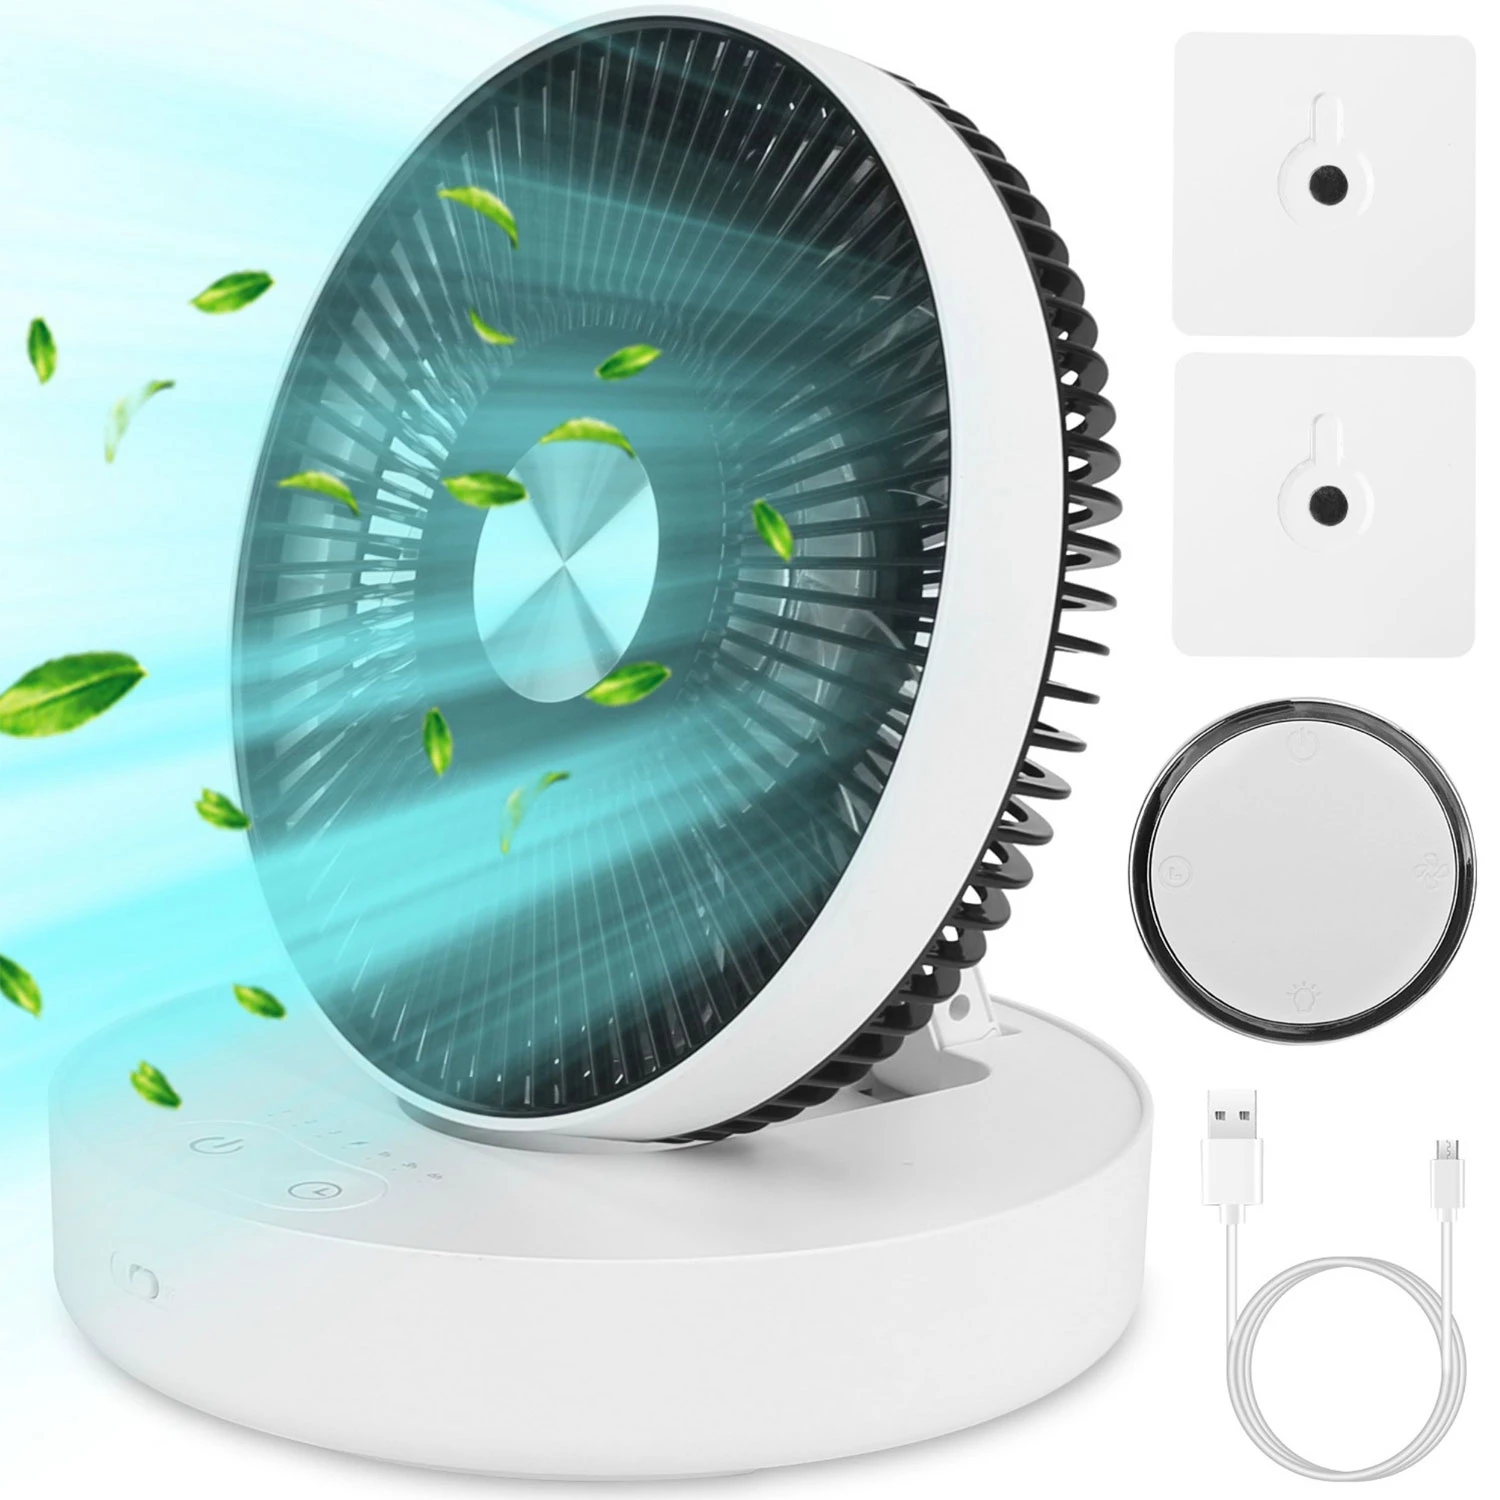 Foldable Rechargeable LED Desk Fan - Wall Mounted, Magnetic Remote, 4 Speeds, 2 Brightness, Time Set